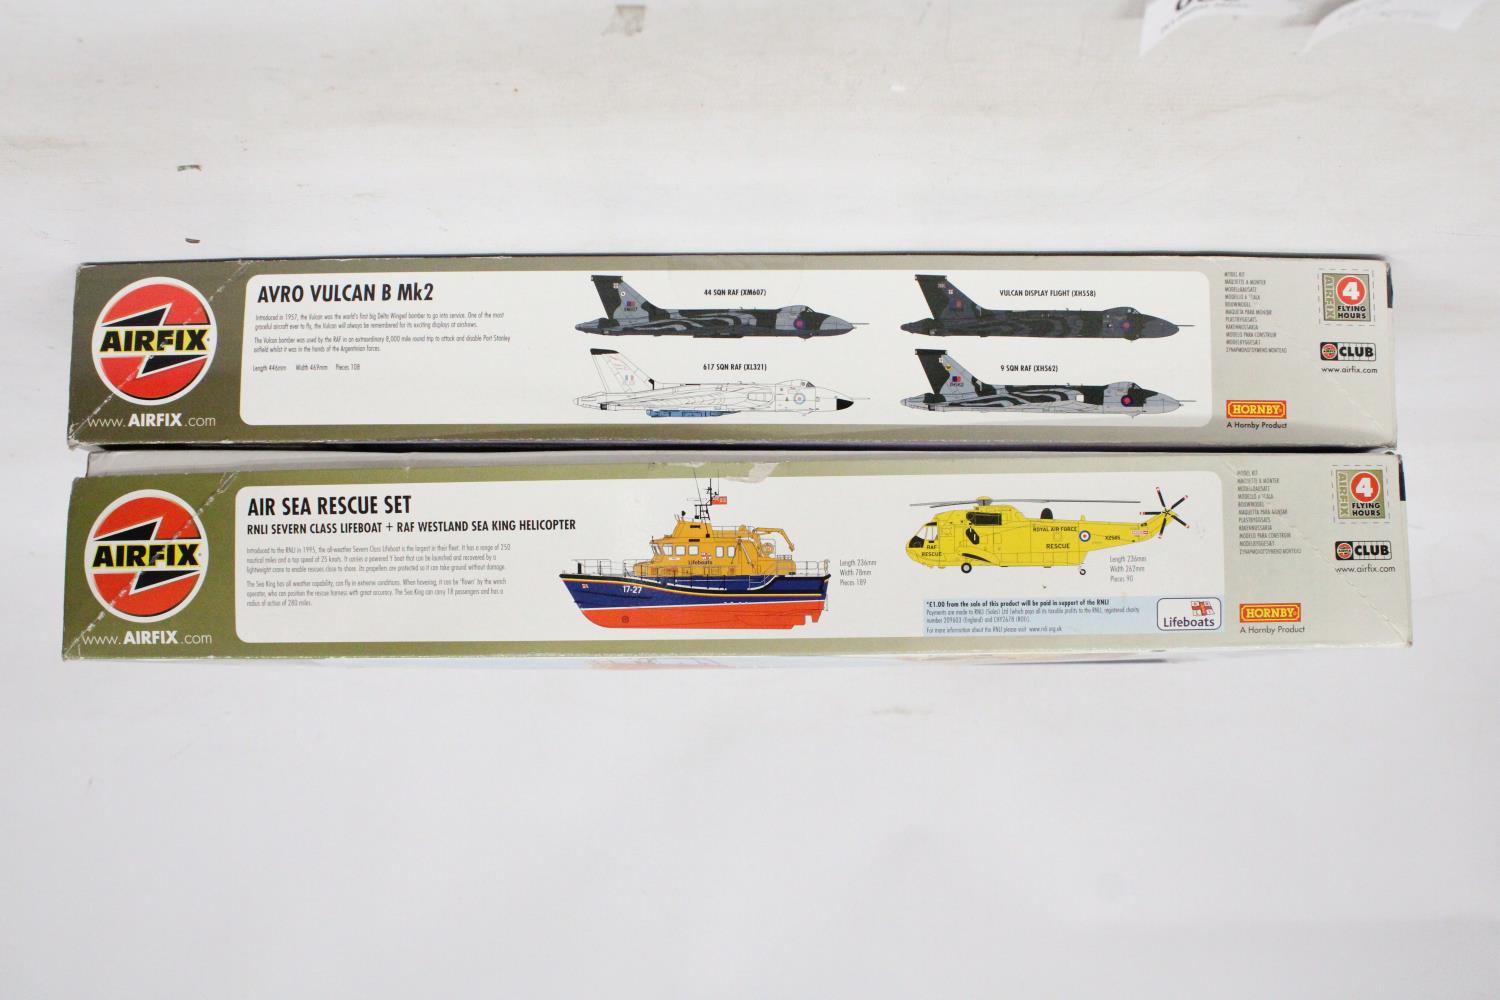 TWO LARGE UNOPENED AIRFIX KITS TO INCLUDE AN AVRO VULCAN B MK2 FALKLANDS WAR 25 YEARS AND A RNLI - Image 4 of 5